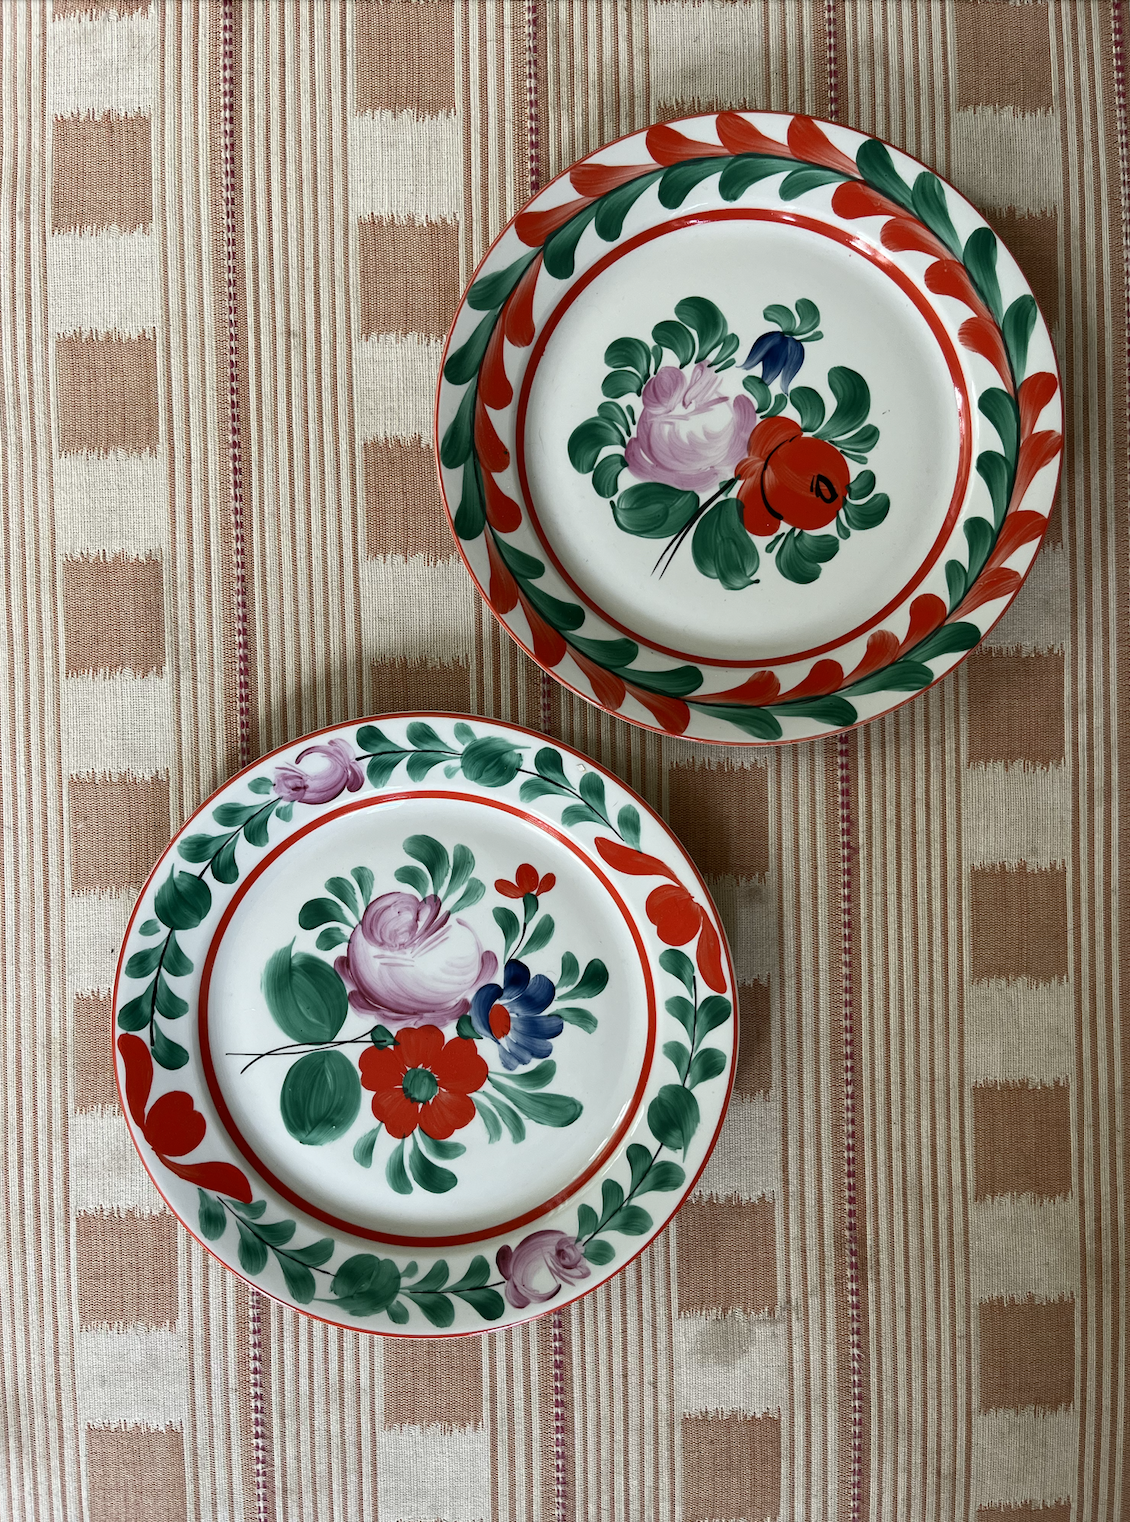 Green & Red, Rare & Antique Pair of Decorative Hungarian Wall Plates